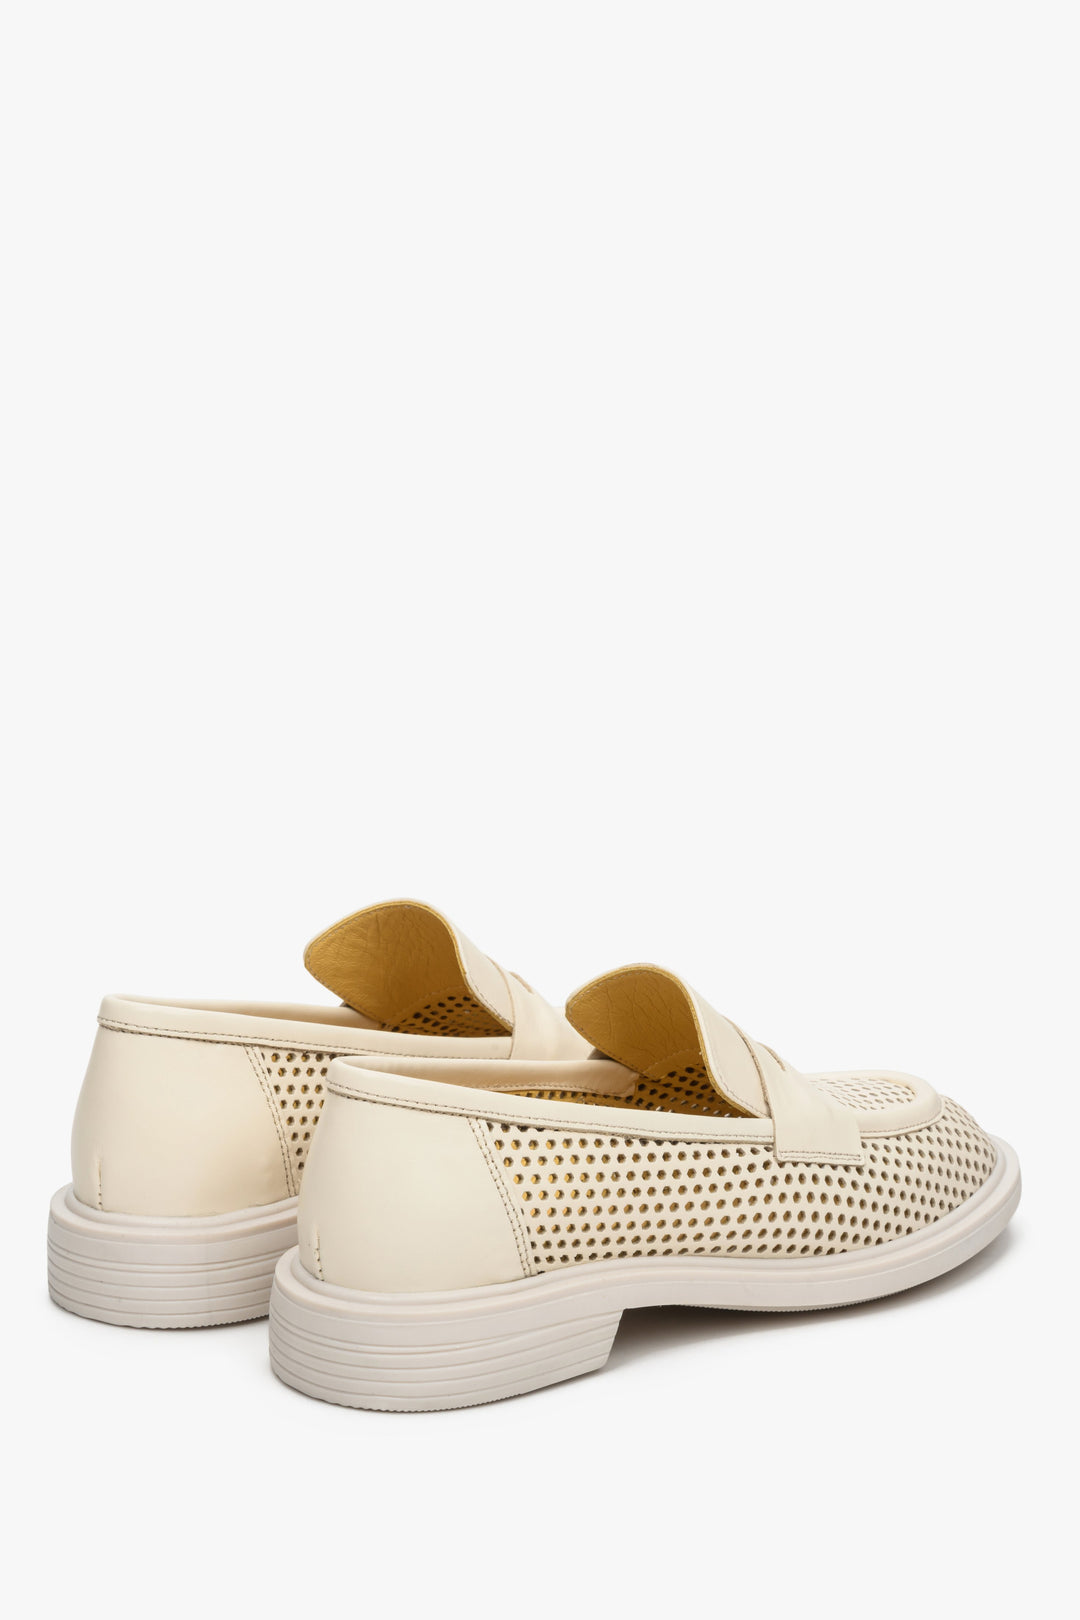 Comfortable light beige perforated women's loafers - close-up on the heel.